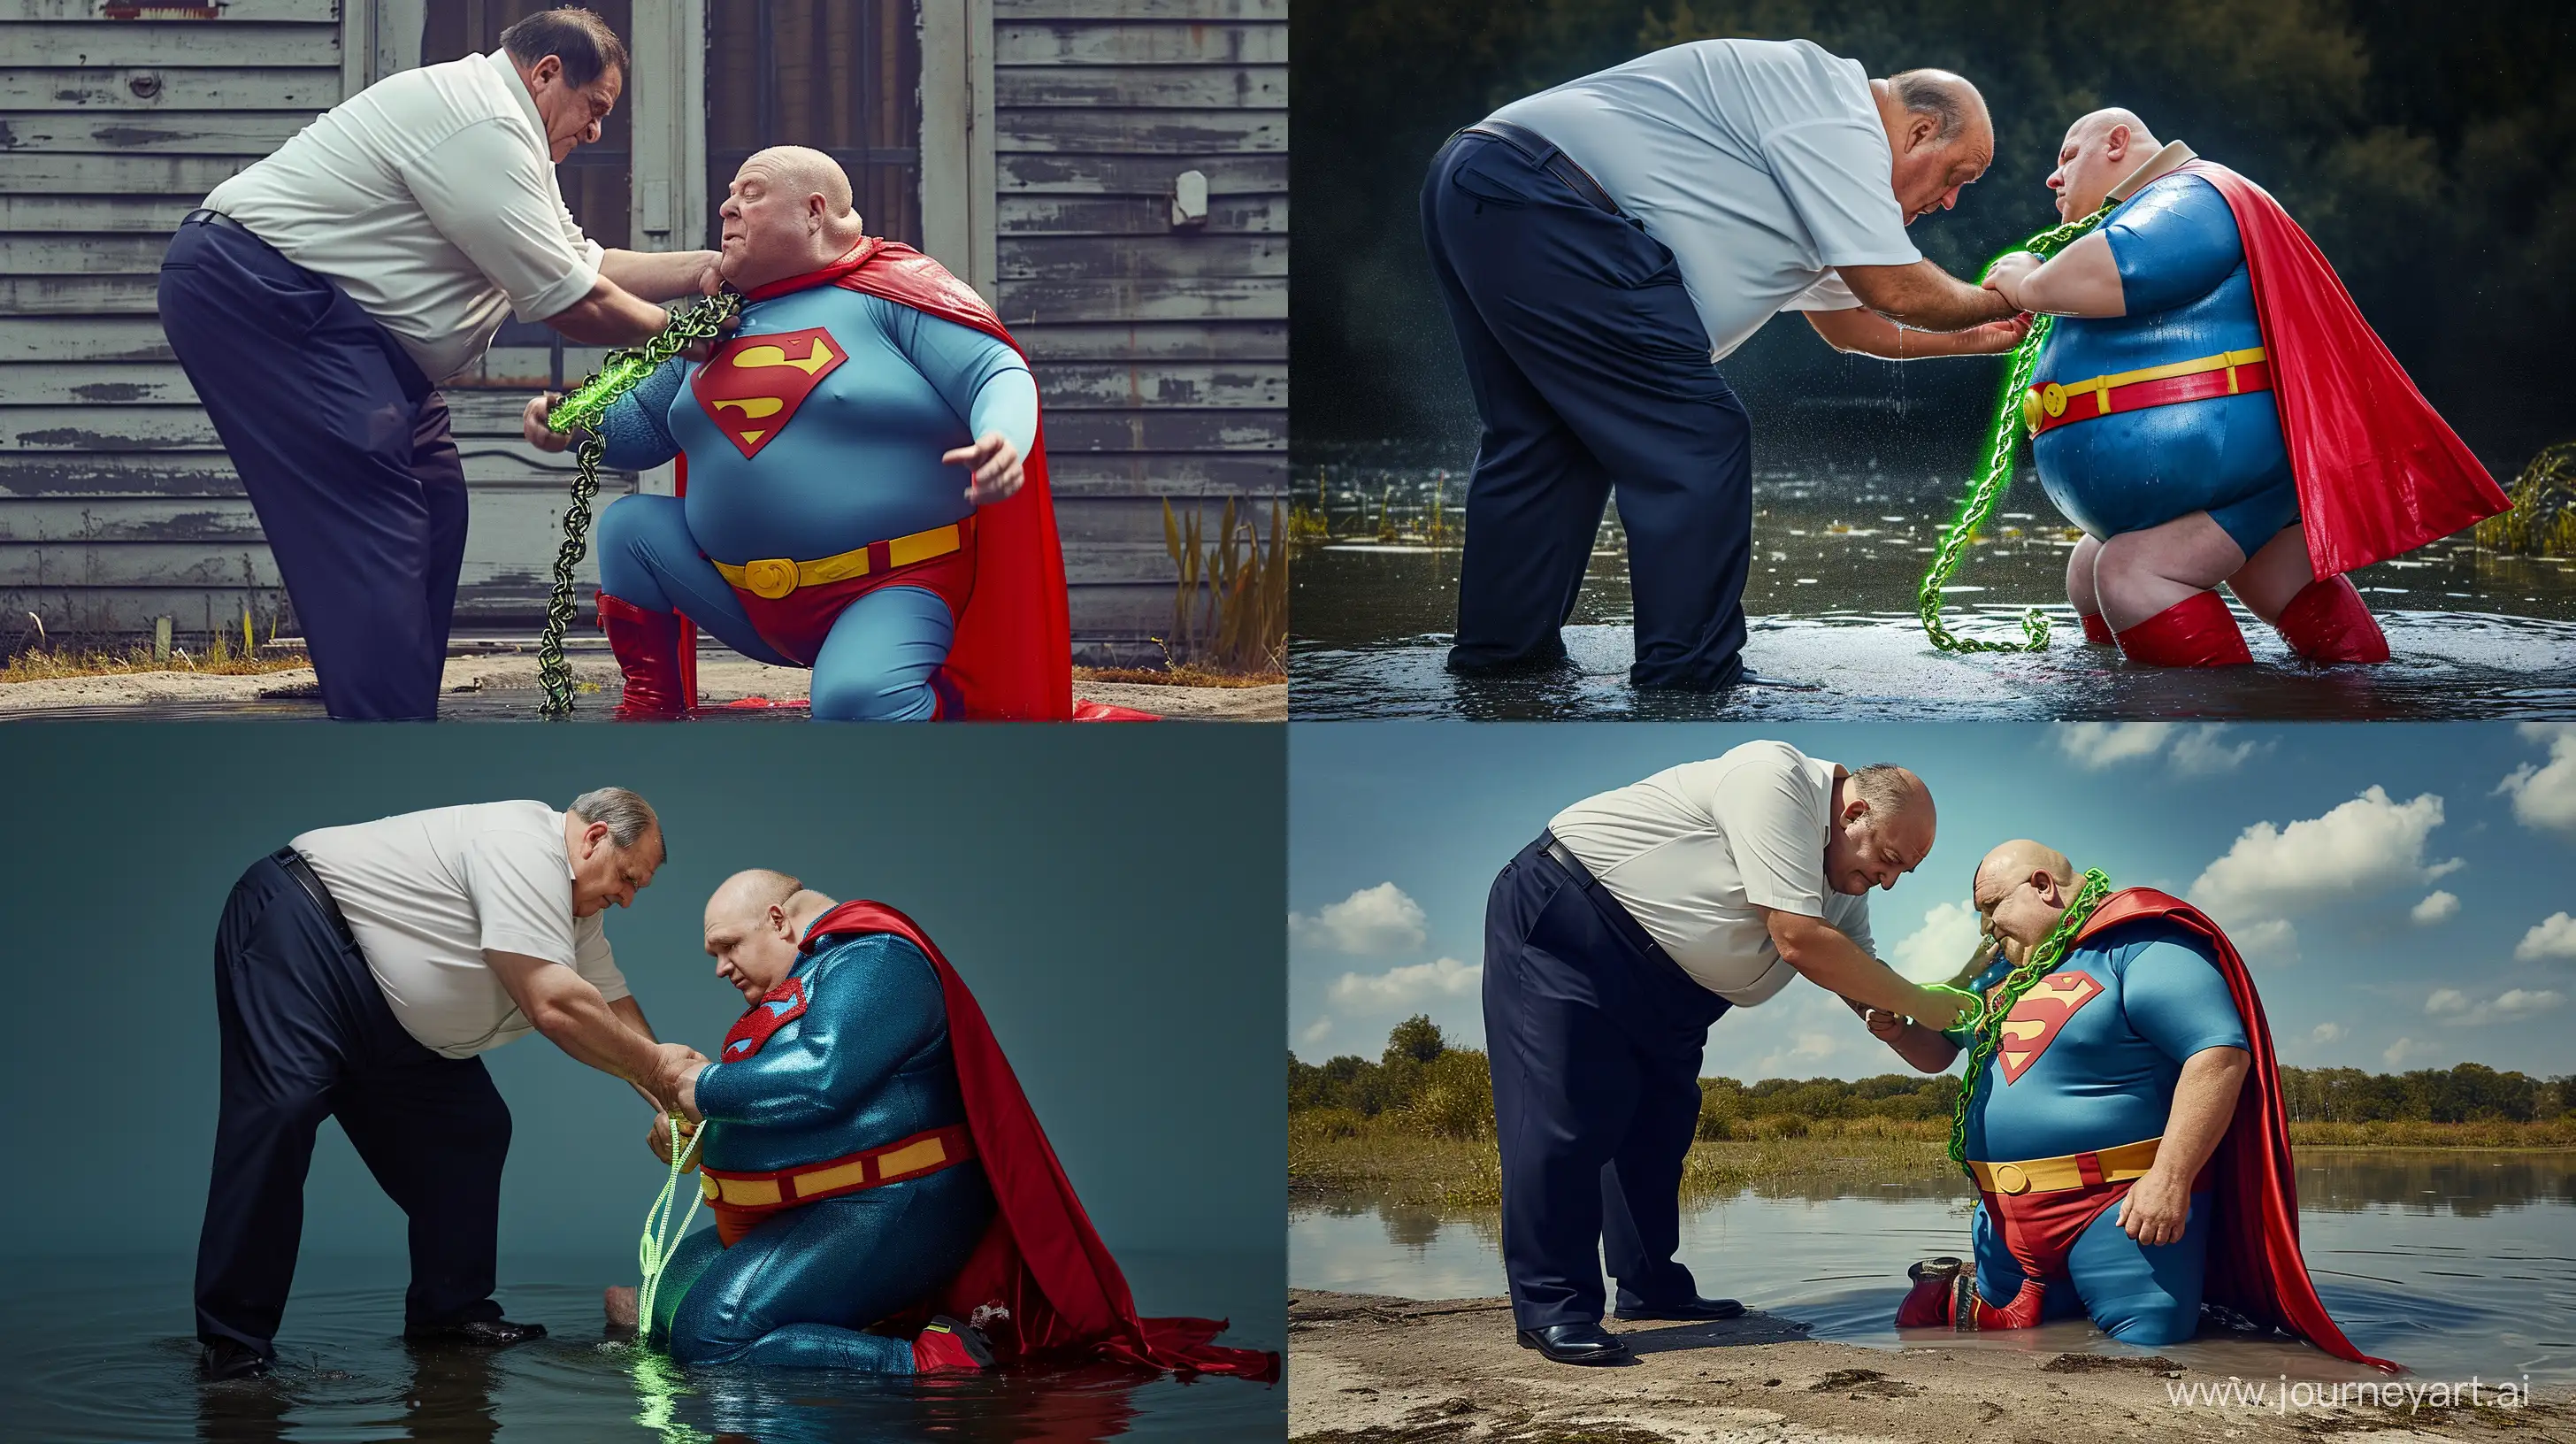 Elderly-Superman-Duo-A-Playful-Water-Affair-with-a-Green-Chain